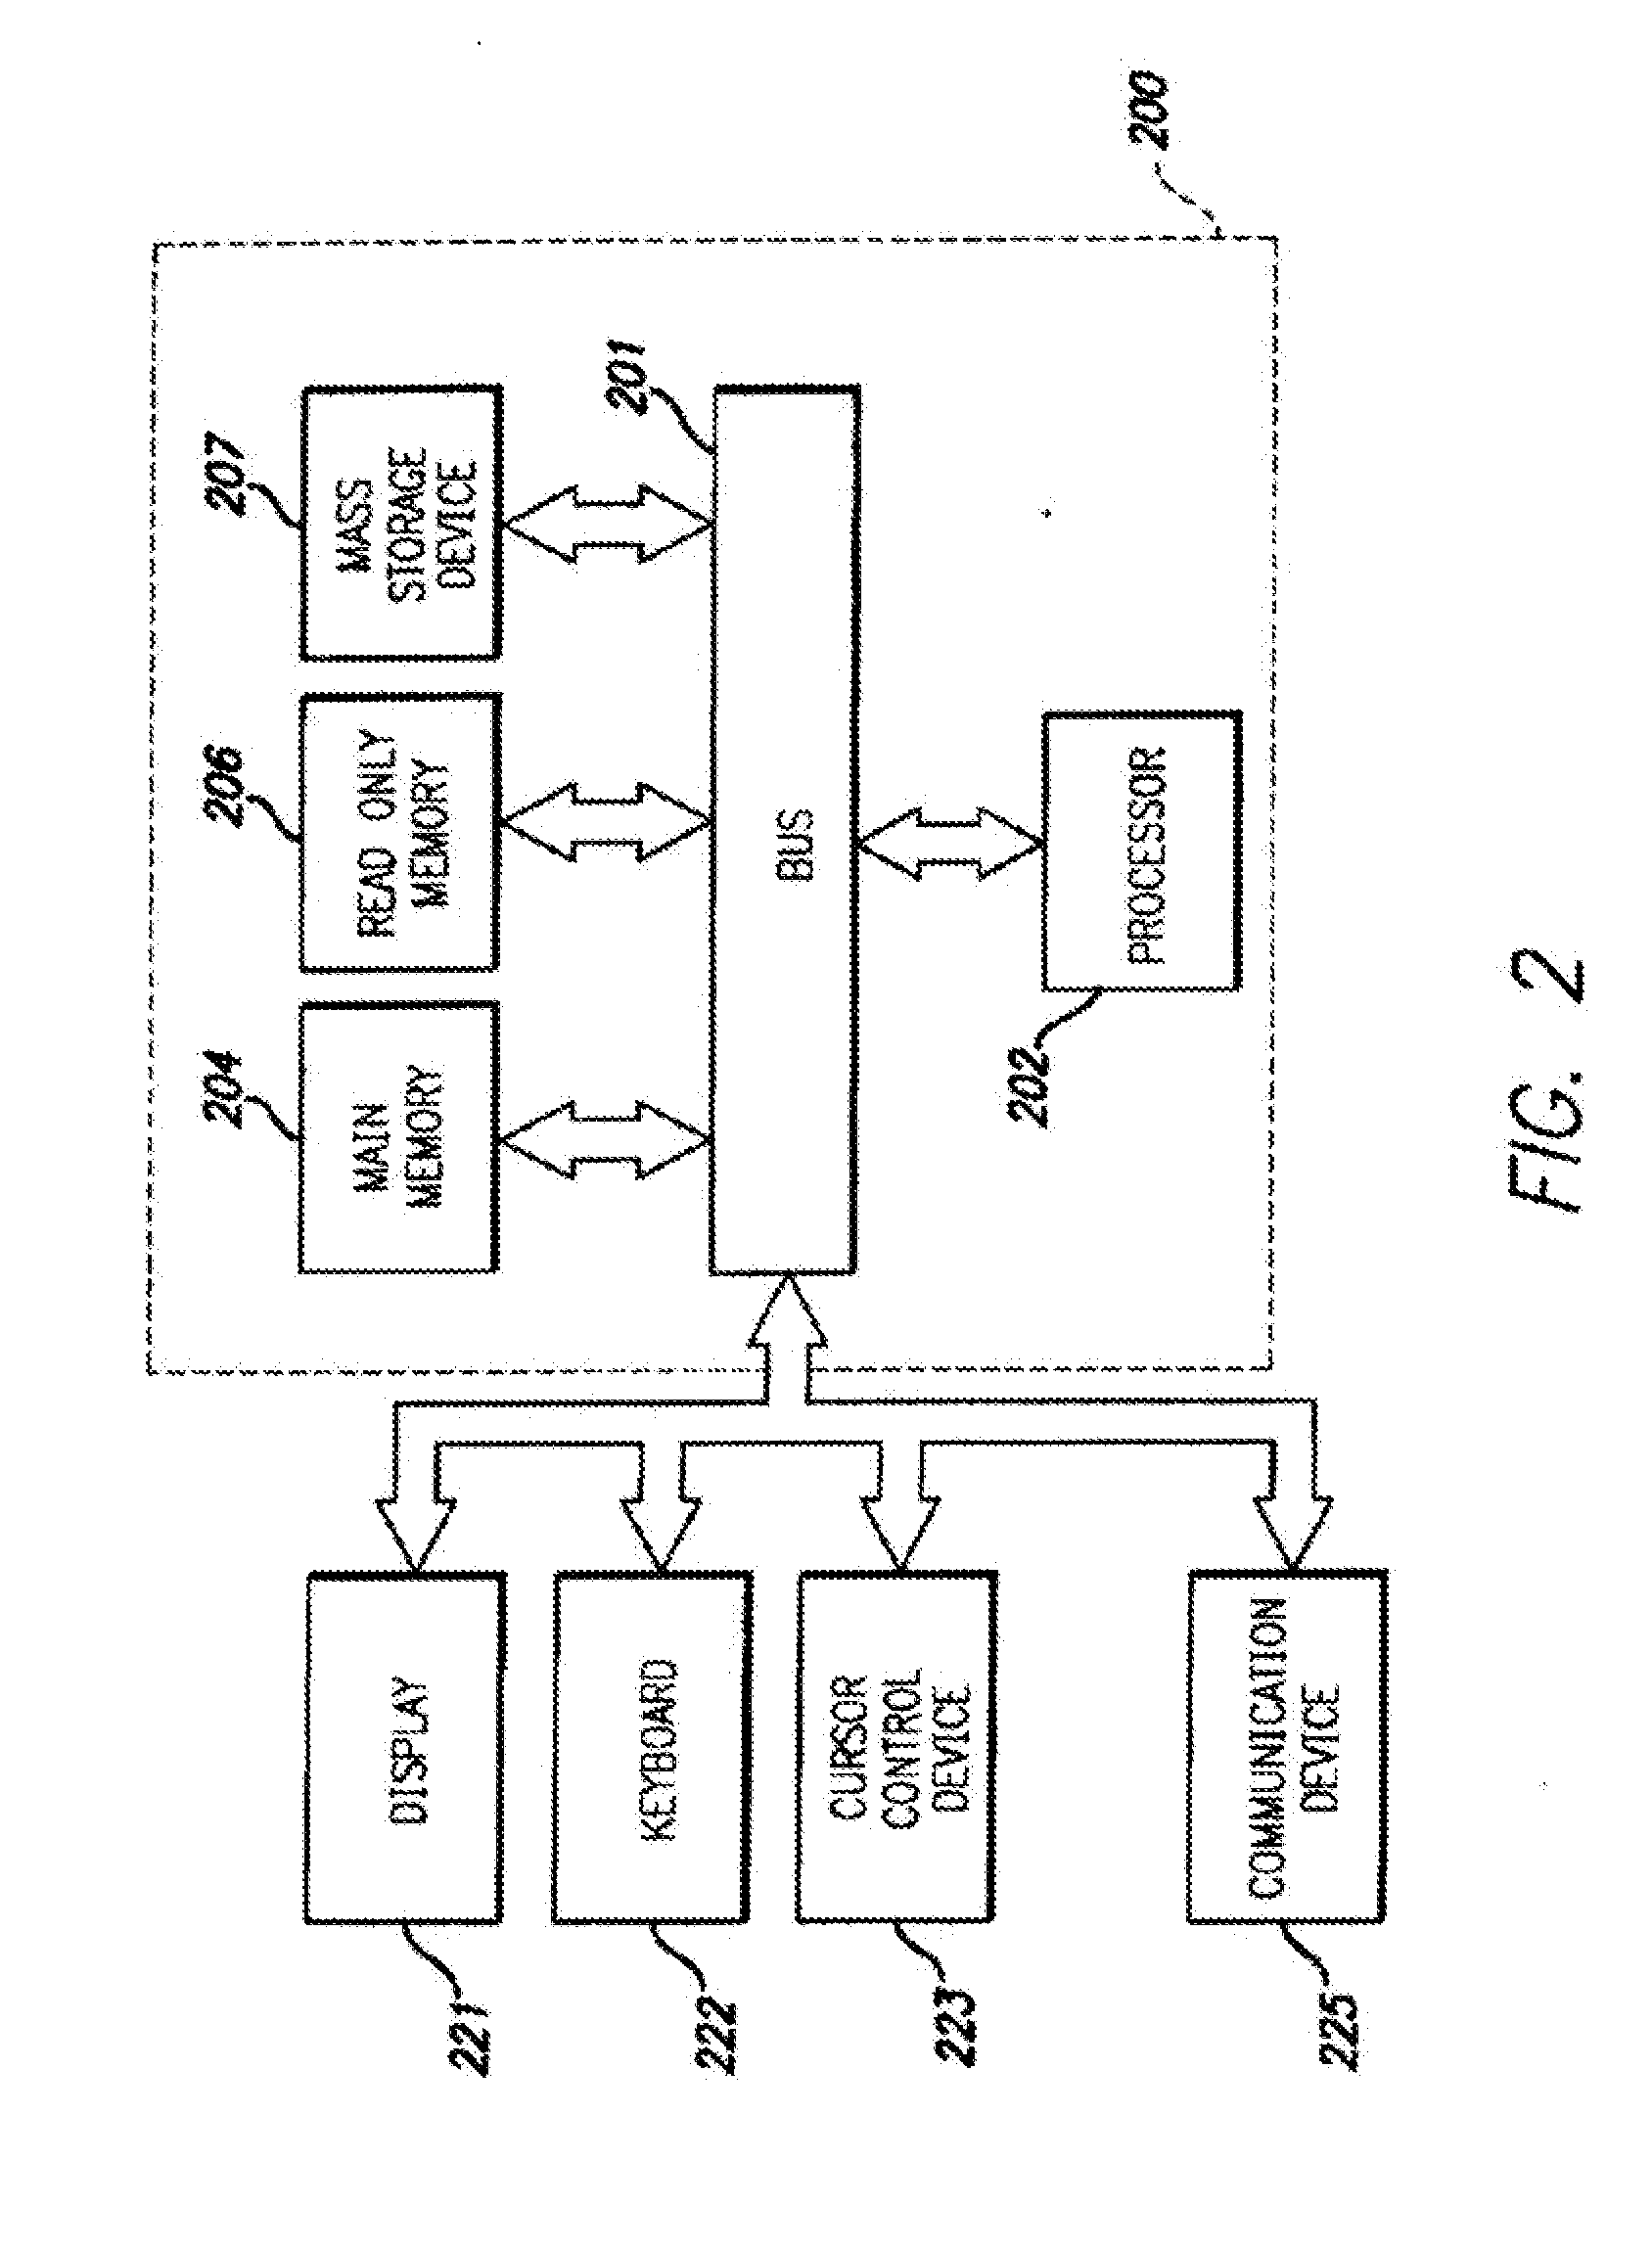 System and method of providing patients incentives for healthy behaviors